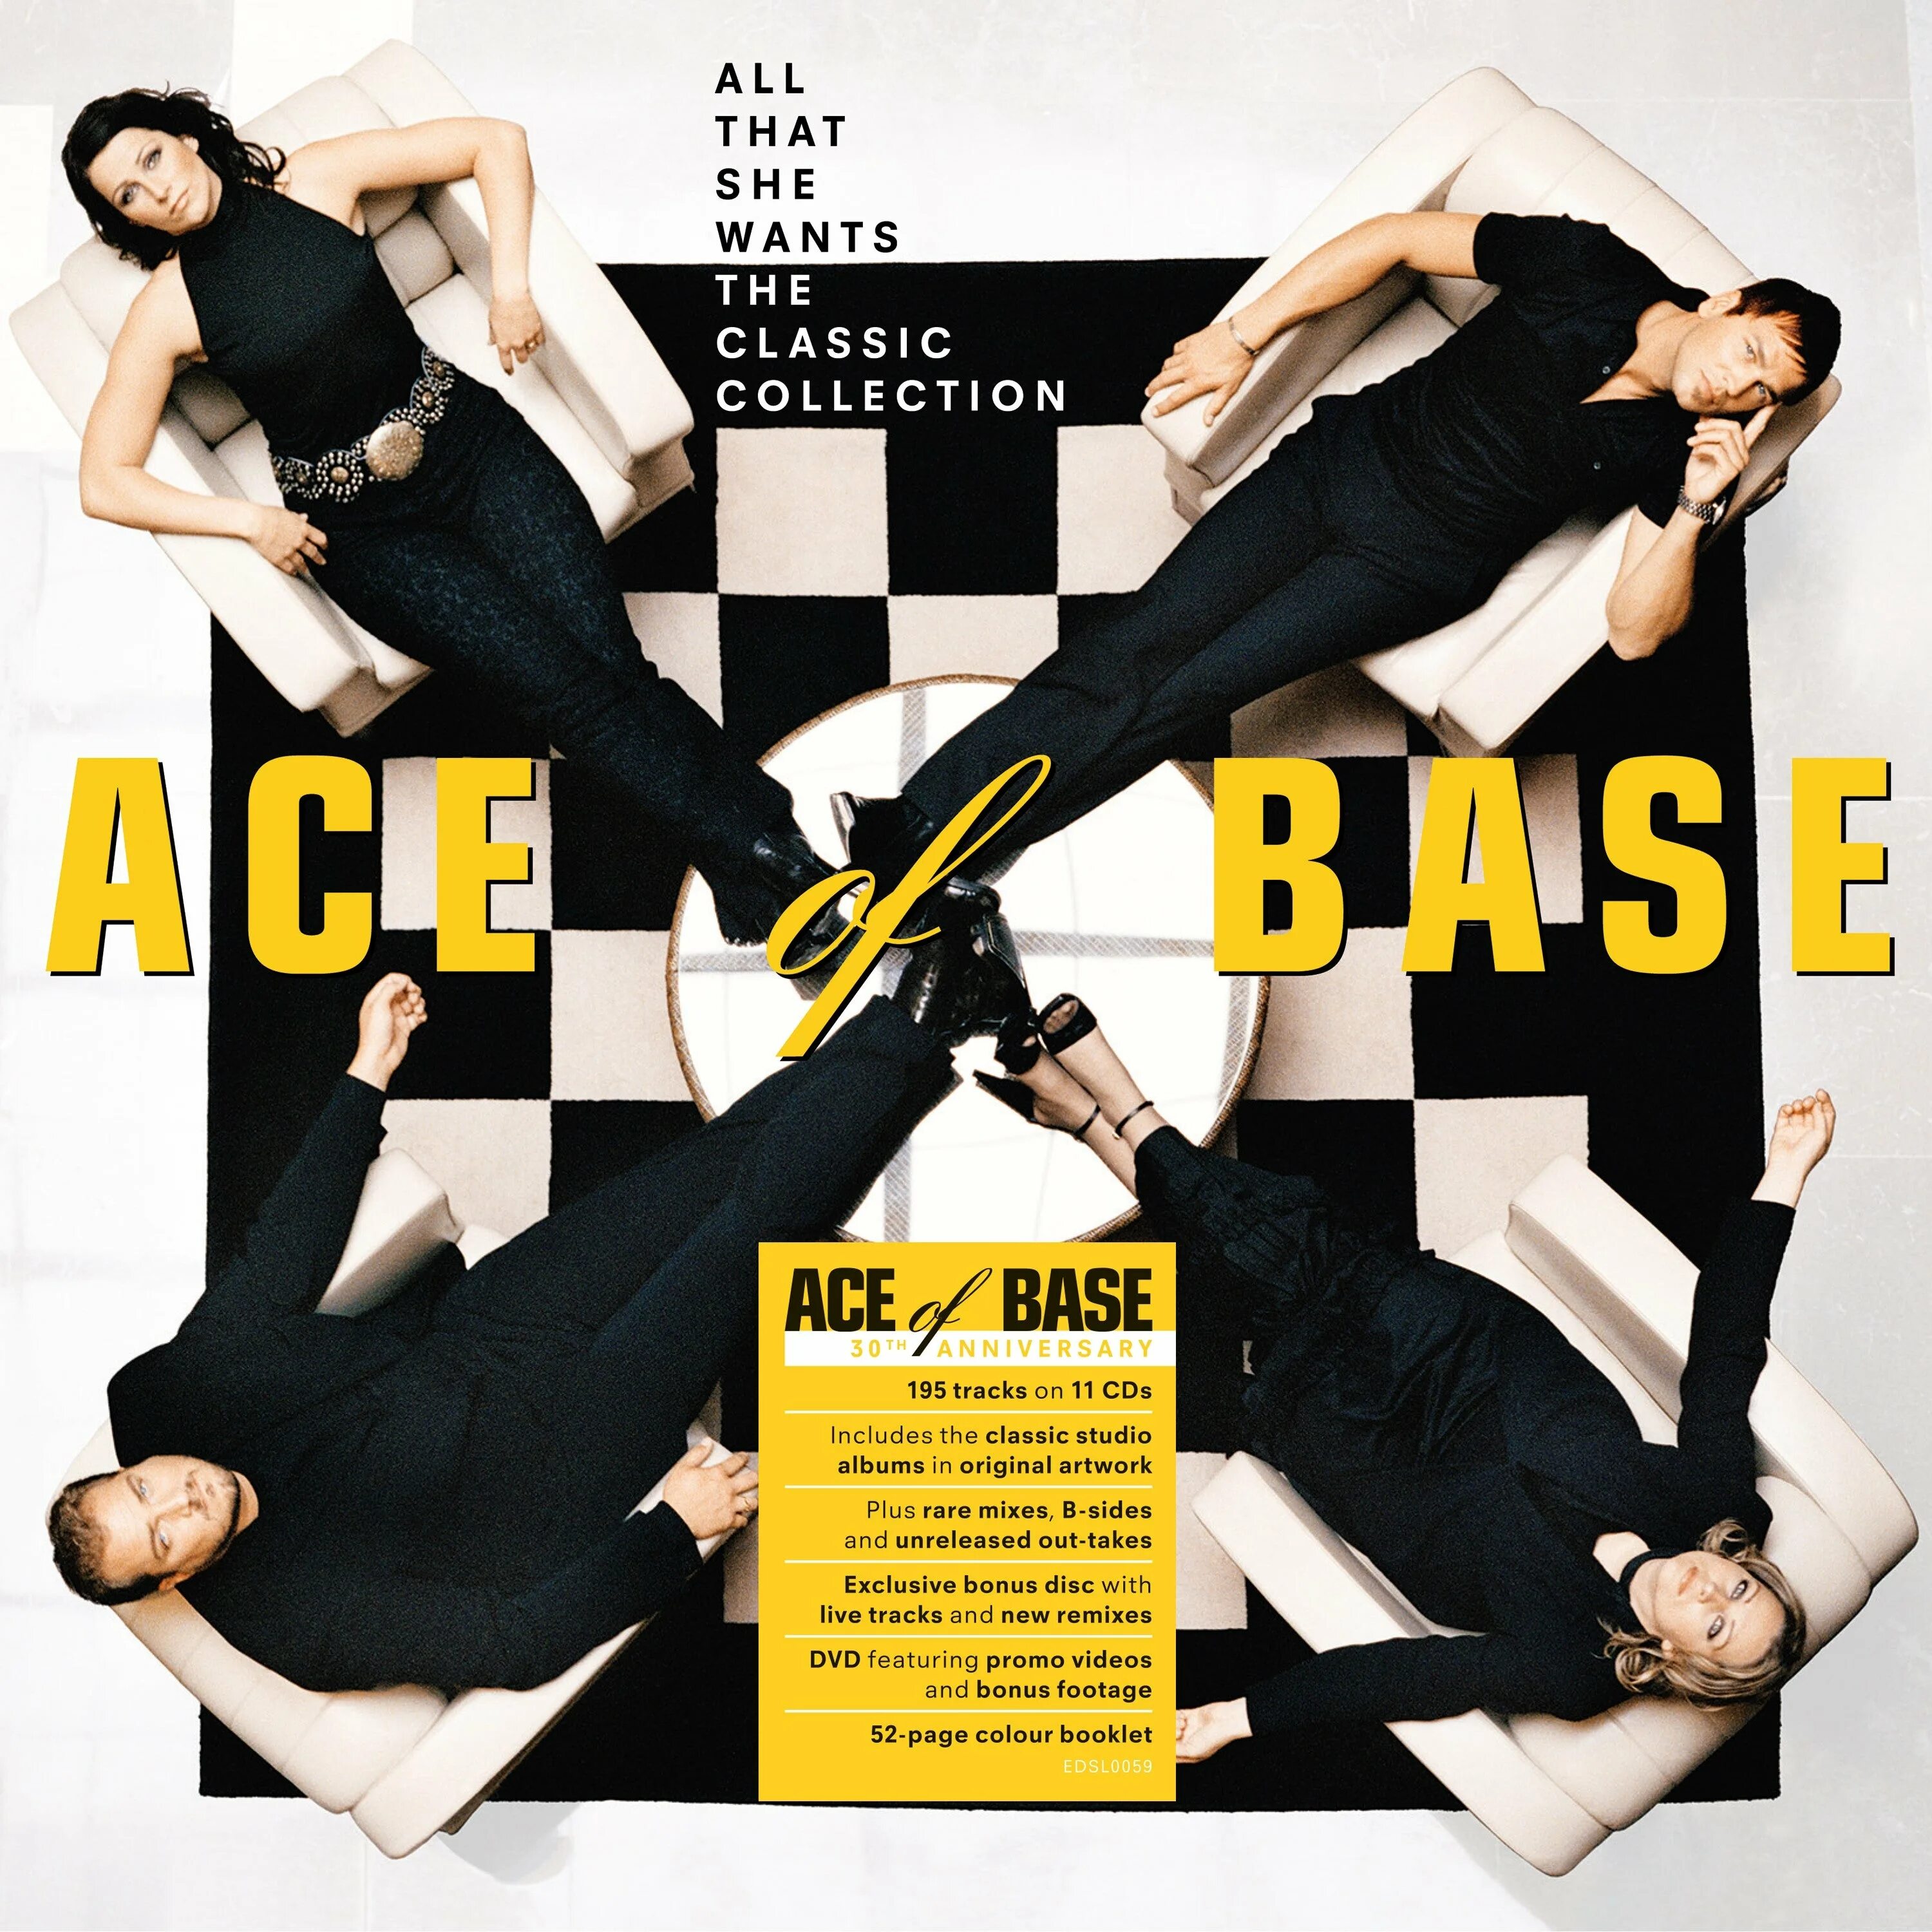 Mandee feat ace of base. Ace of Base CD. Ace of Base all want she wants. Группа Ace of Base 2020. Ace of Base all that she wants альбом.